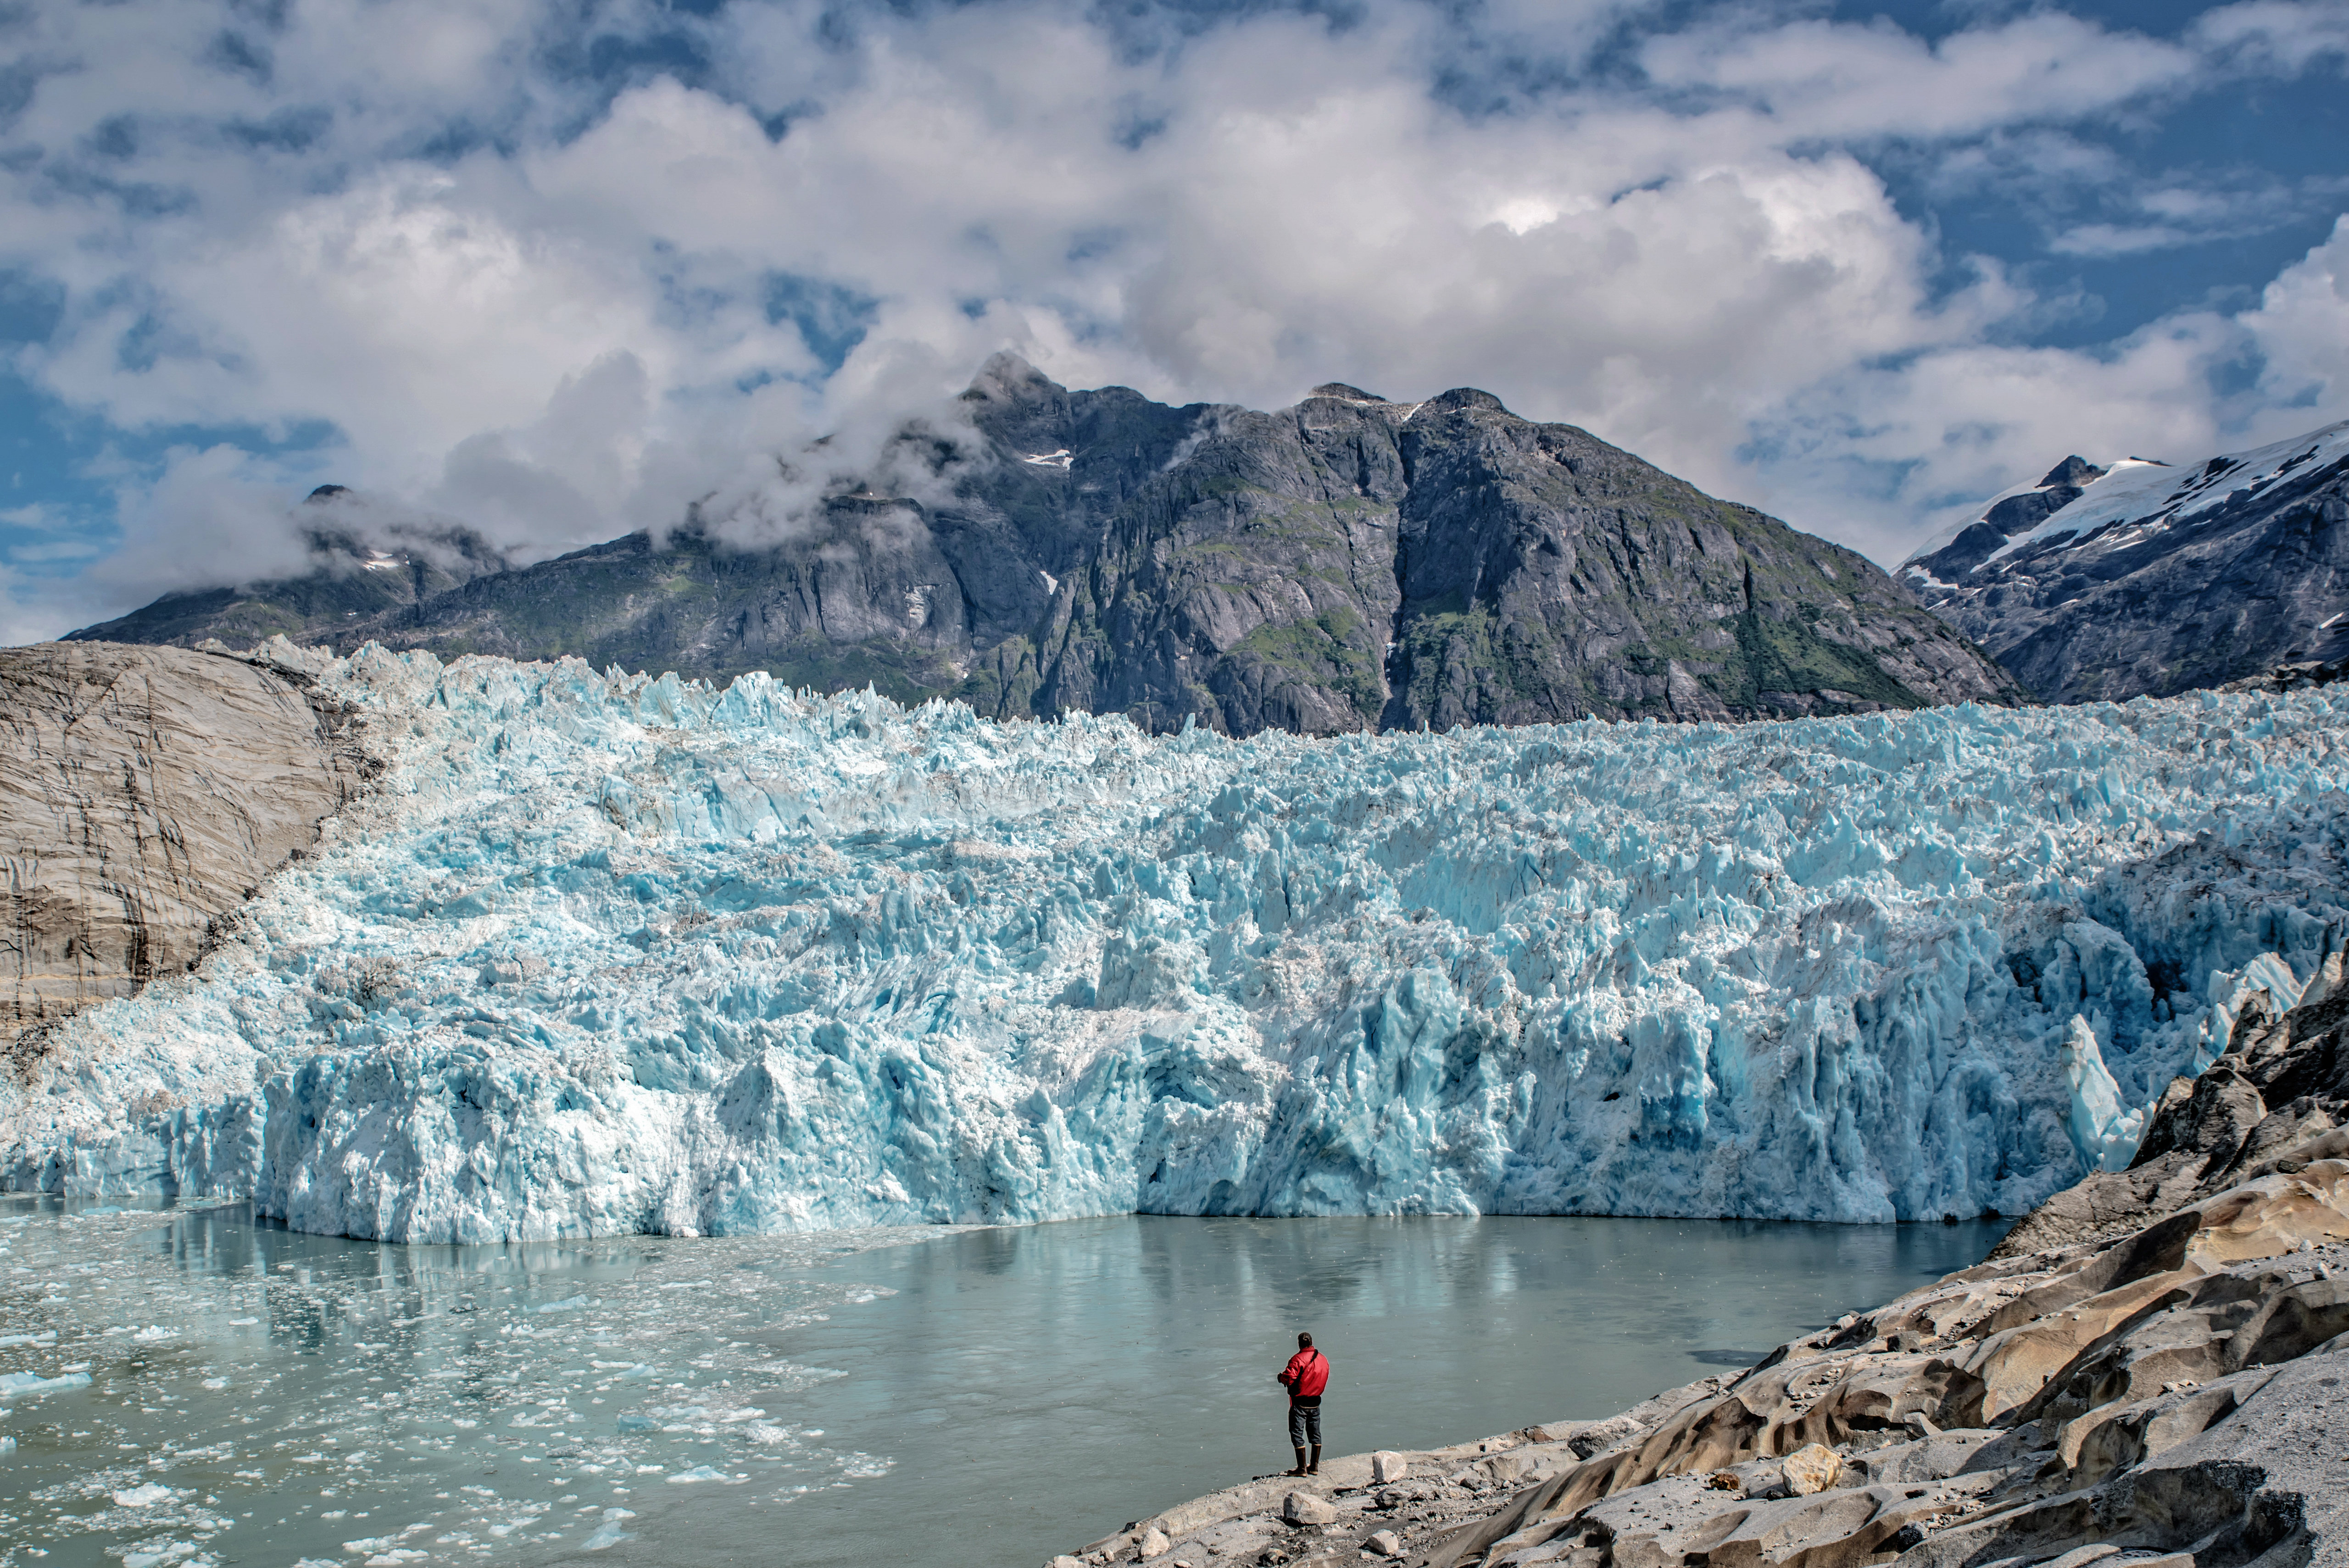 An image of a glacier with a person standing in front of it.